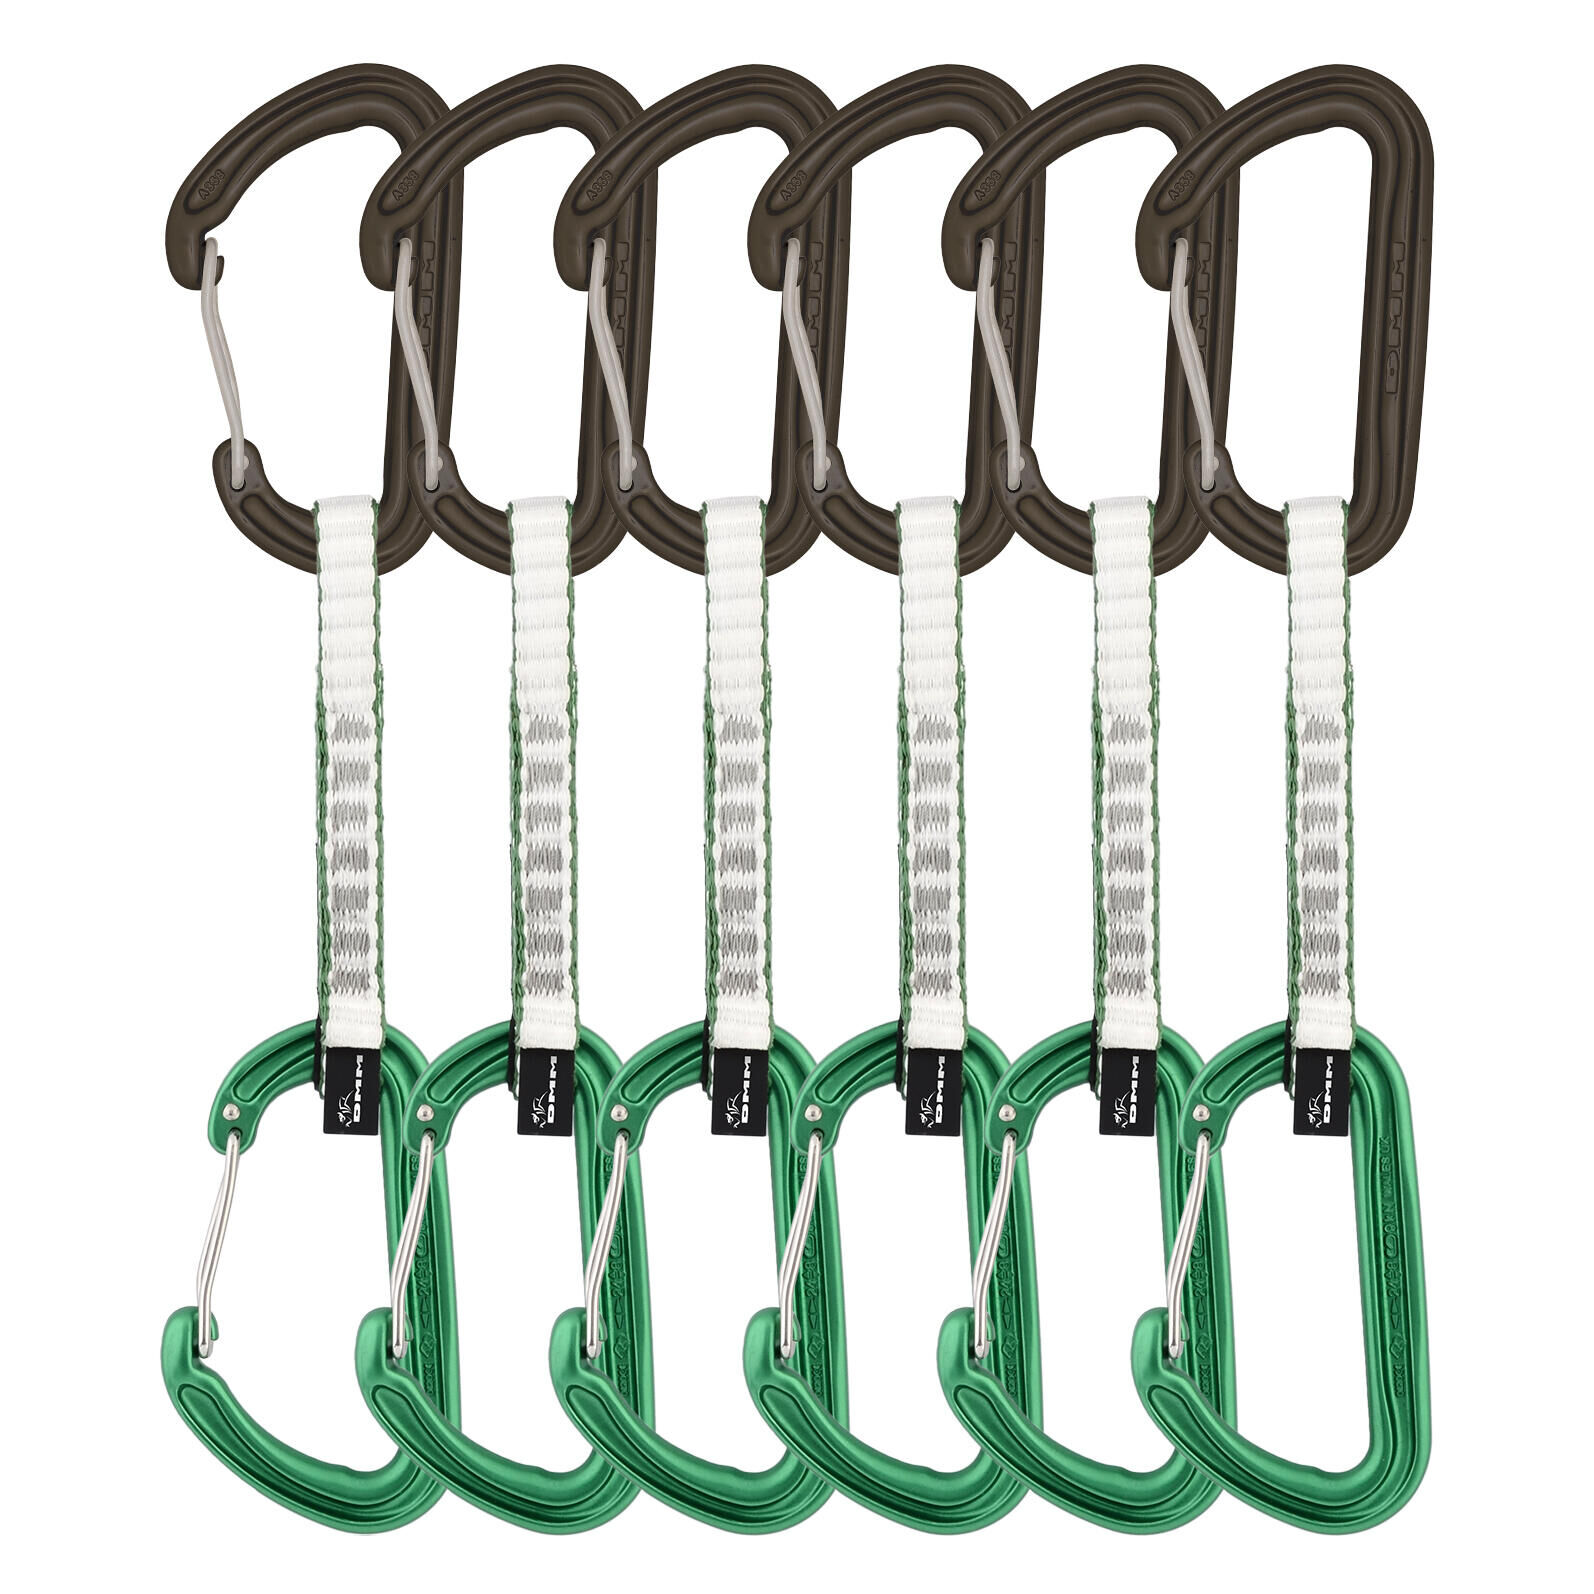 DMM Spectre Quickdraw 12cm - Green - 6 Pack